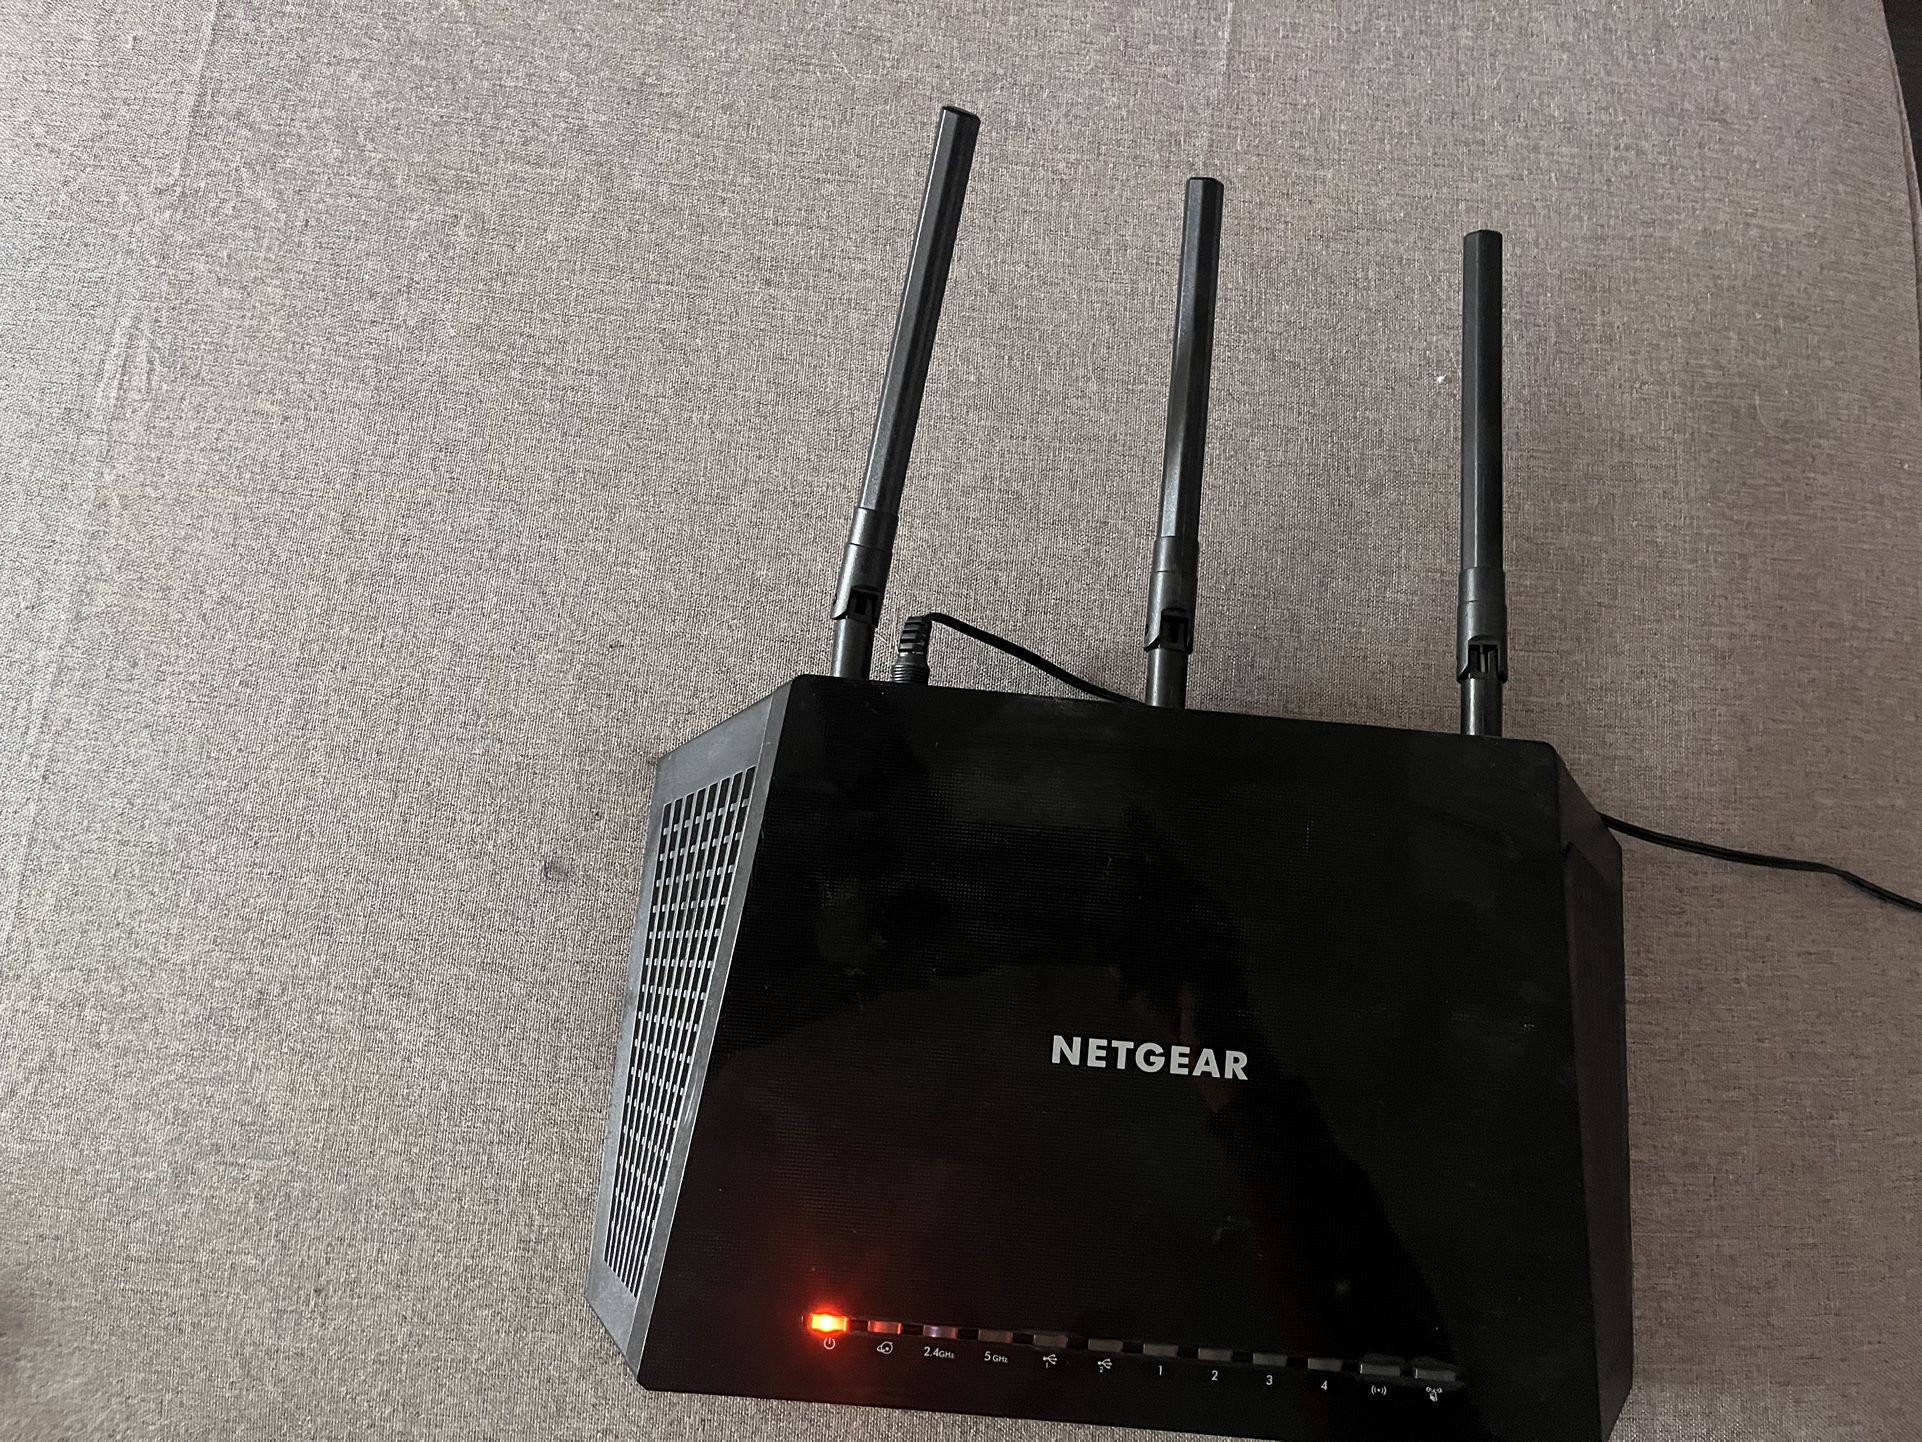 Nether AC1750 Smart WiFi Router